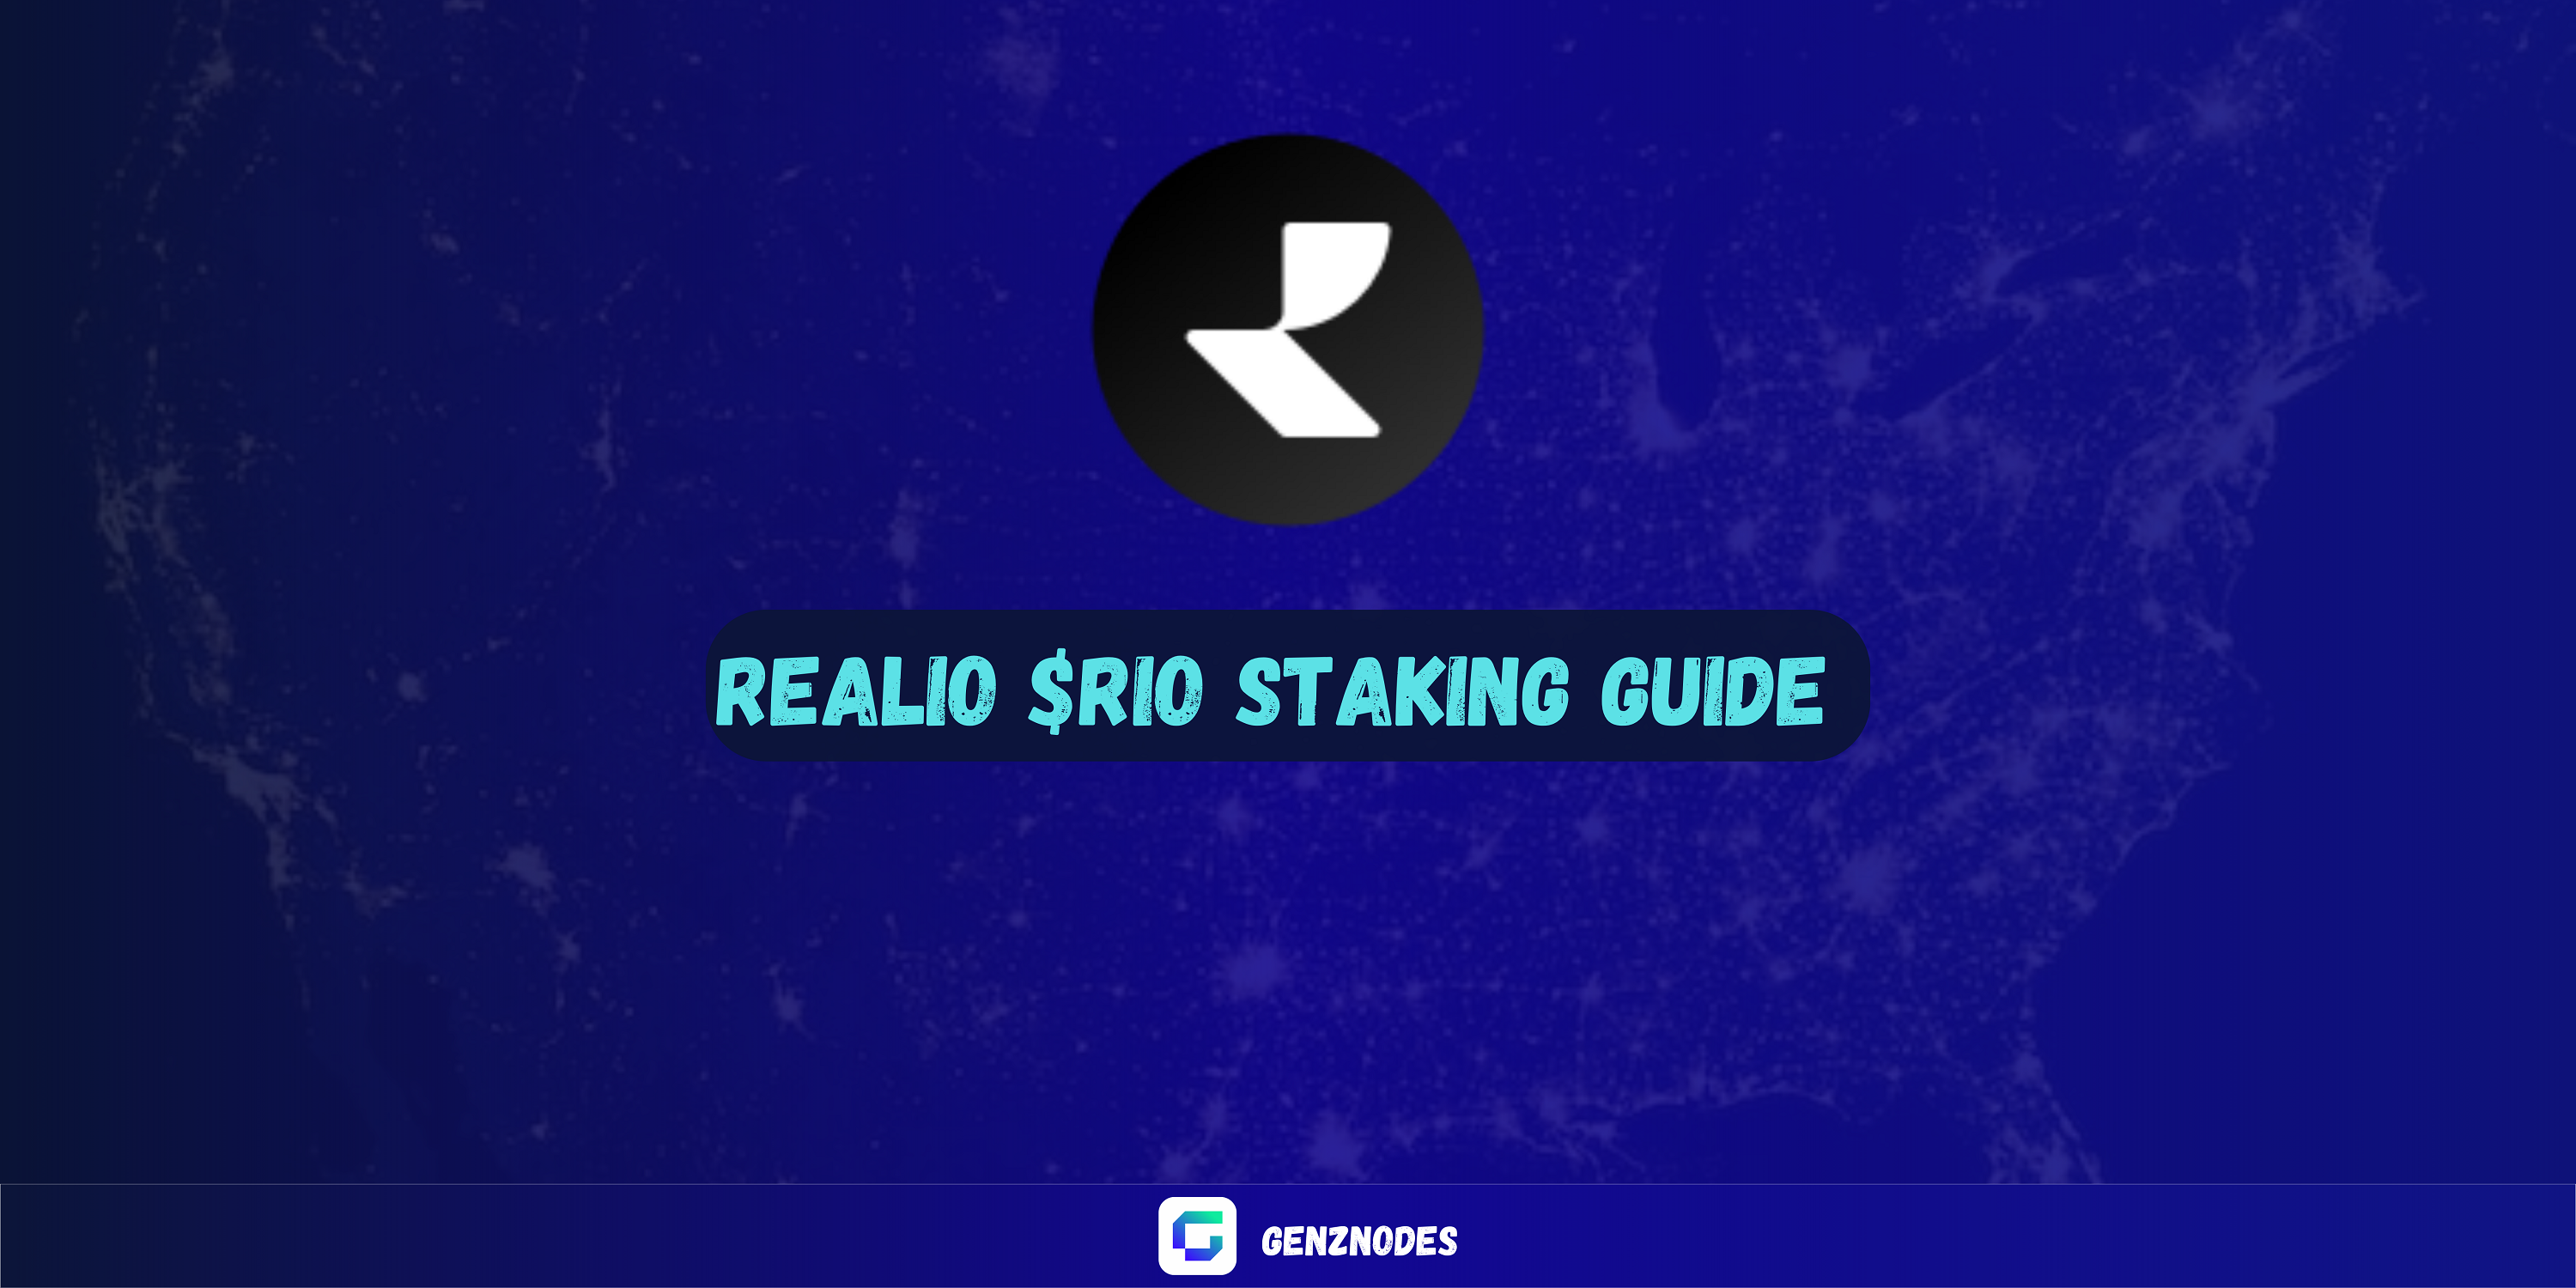 How to Delegate your $RIO with Keplr, enable REStake , participate as a consensus participant to help secure the network, become a  member of governance and earning staking rewards.